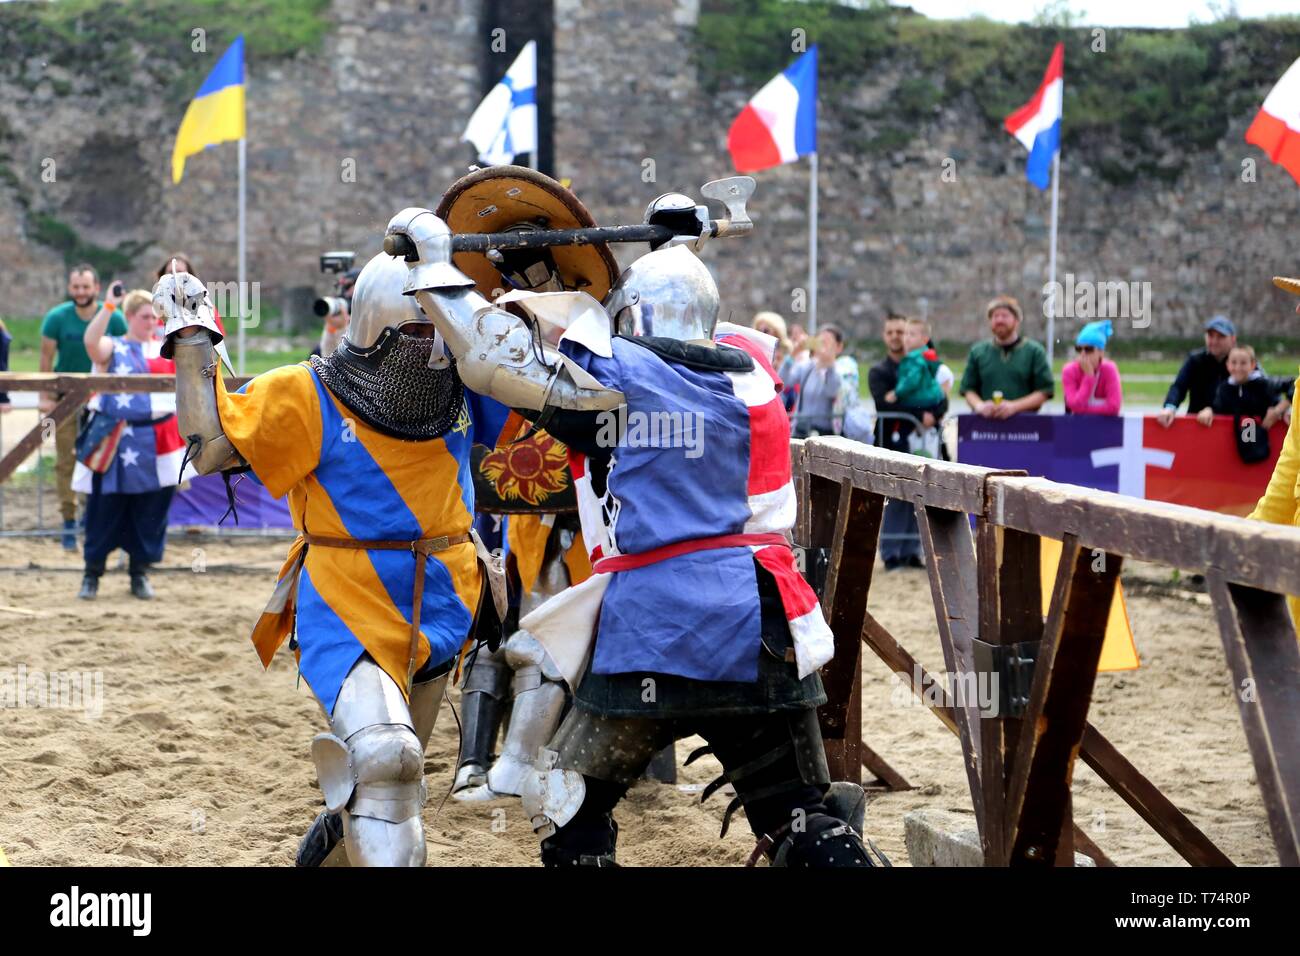 Smederevo. 2nd May, 2019. Competitors clash at the opening day of the 10th World National HMB (Historic Medieval Battle) Championship in Smederevo, Serbia on May 2, 2019. Fighters from 40 countries gathered in the Serbian city of Smederevo for an unusual international tournament that recreates historic battle techniques-the World National HMB Championship. The Chinese team is made up of 27 members, and it is China's third appearance at the event. Credit: Shi Zhongyu/Xinhua/Alamy Live News Stock Photo